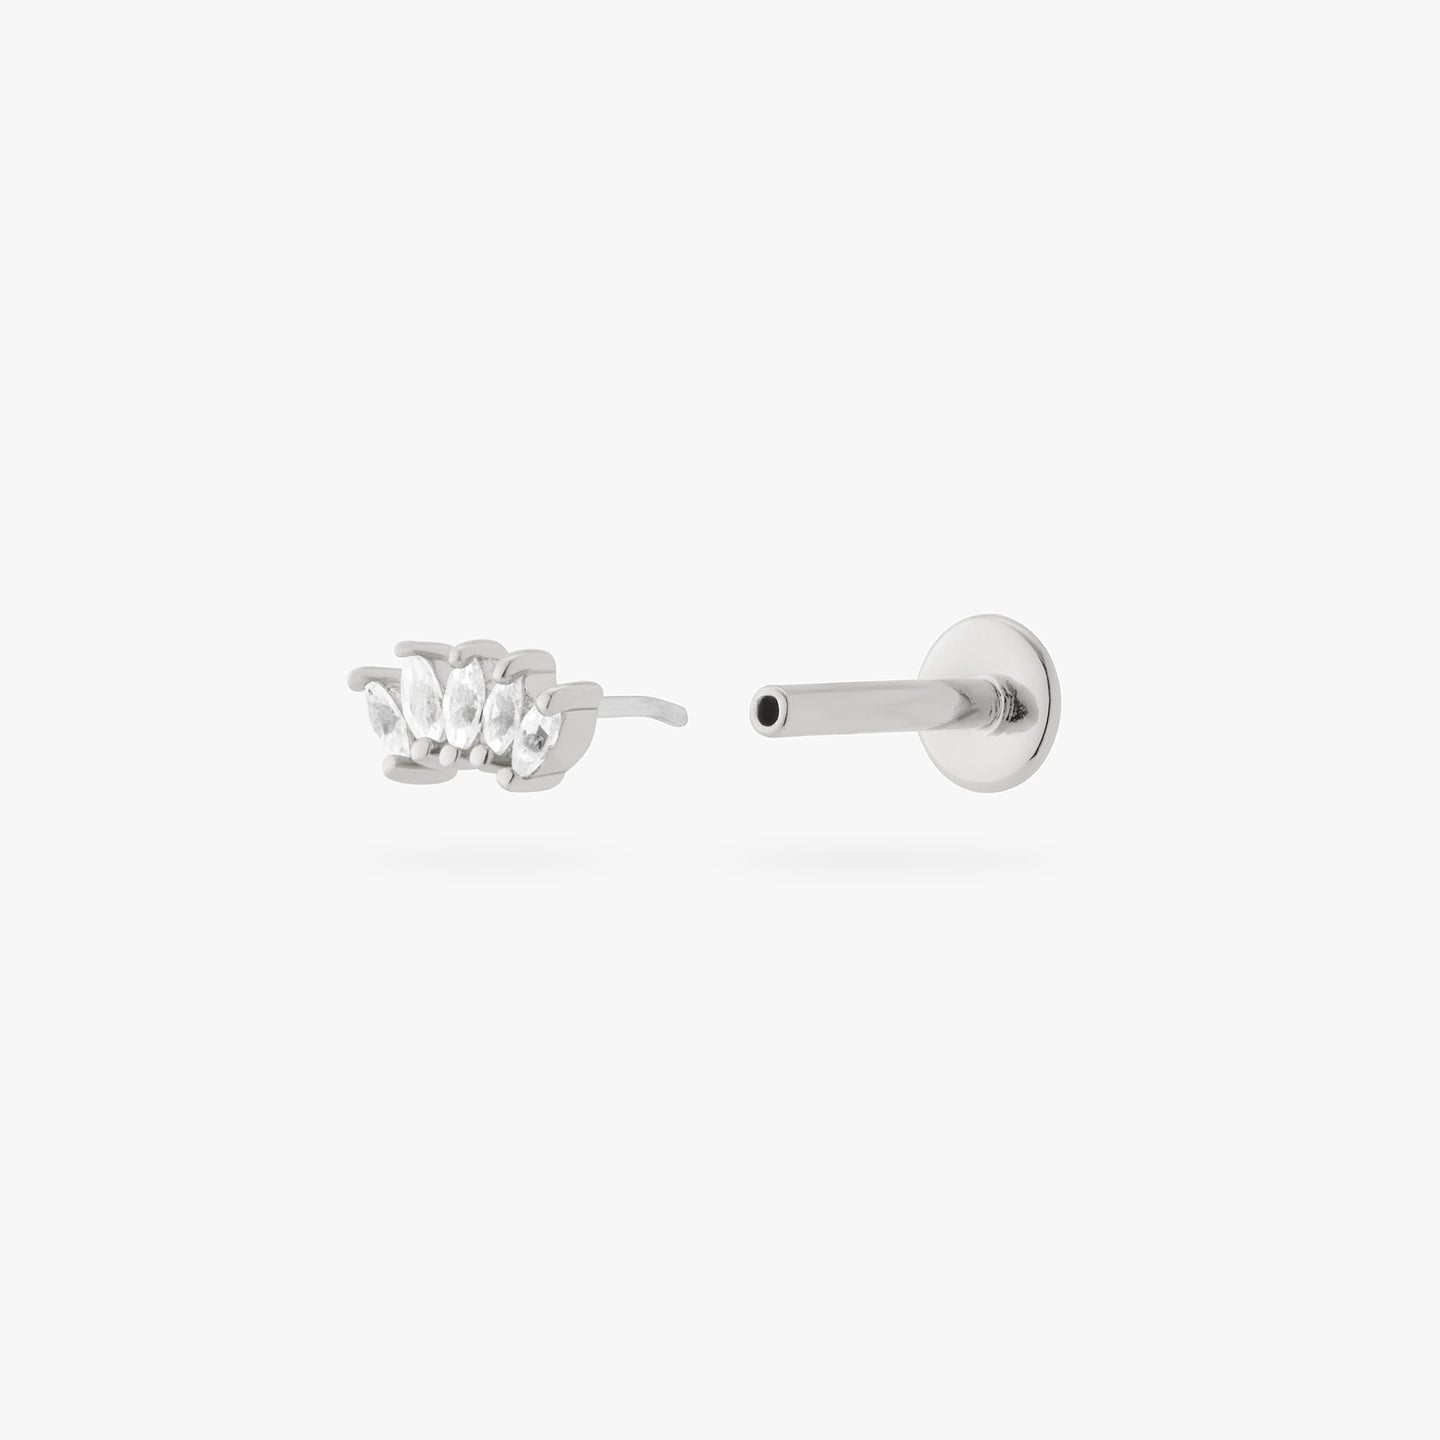 a silver flatback stud with a small crown-shape of clear marquise studs color:null|silver/clear